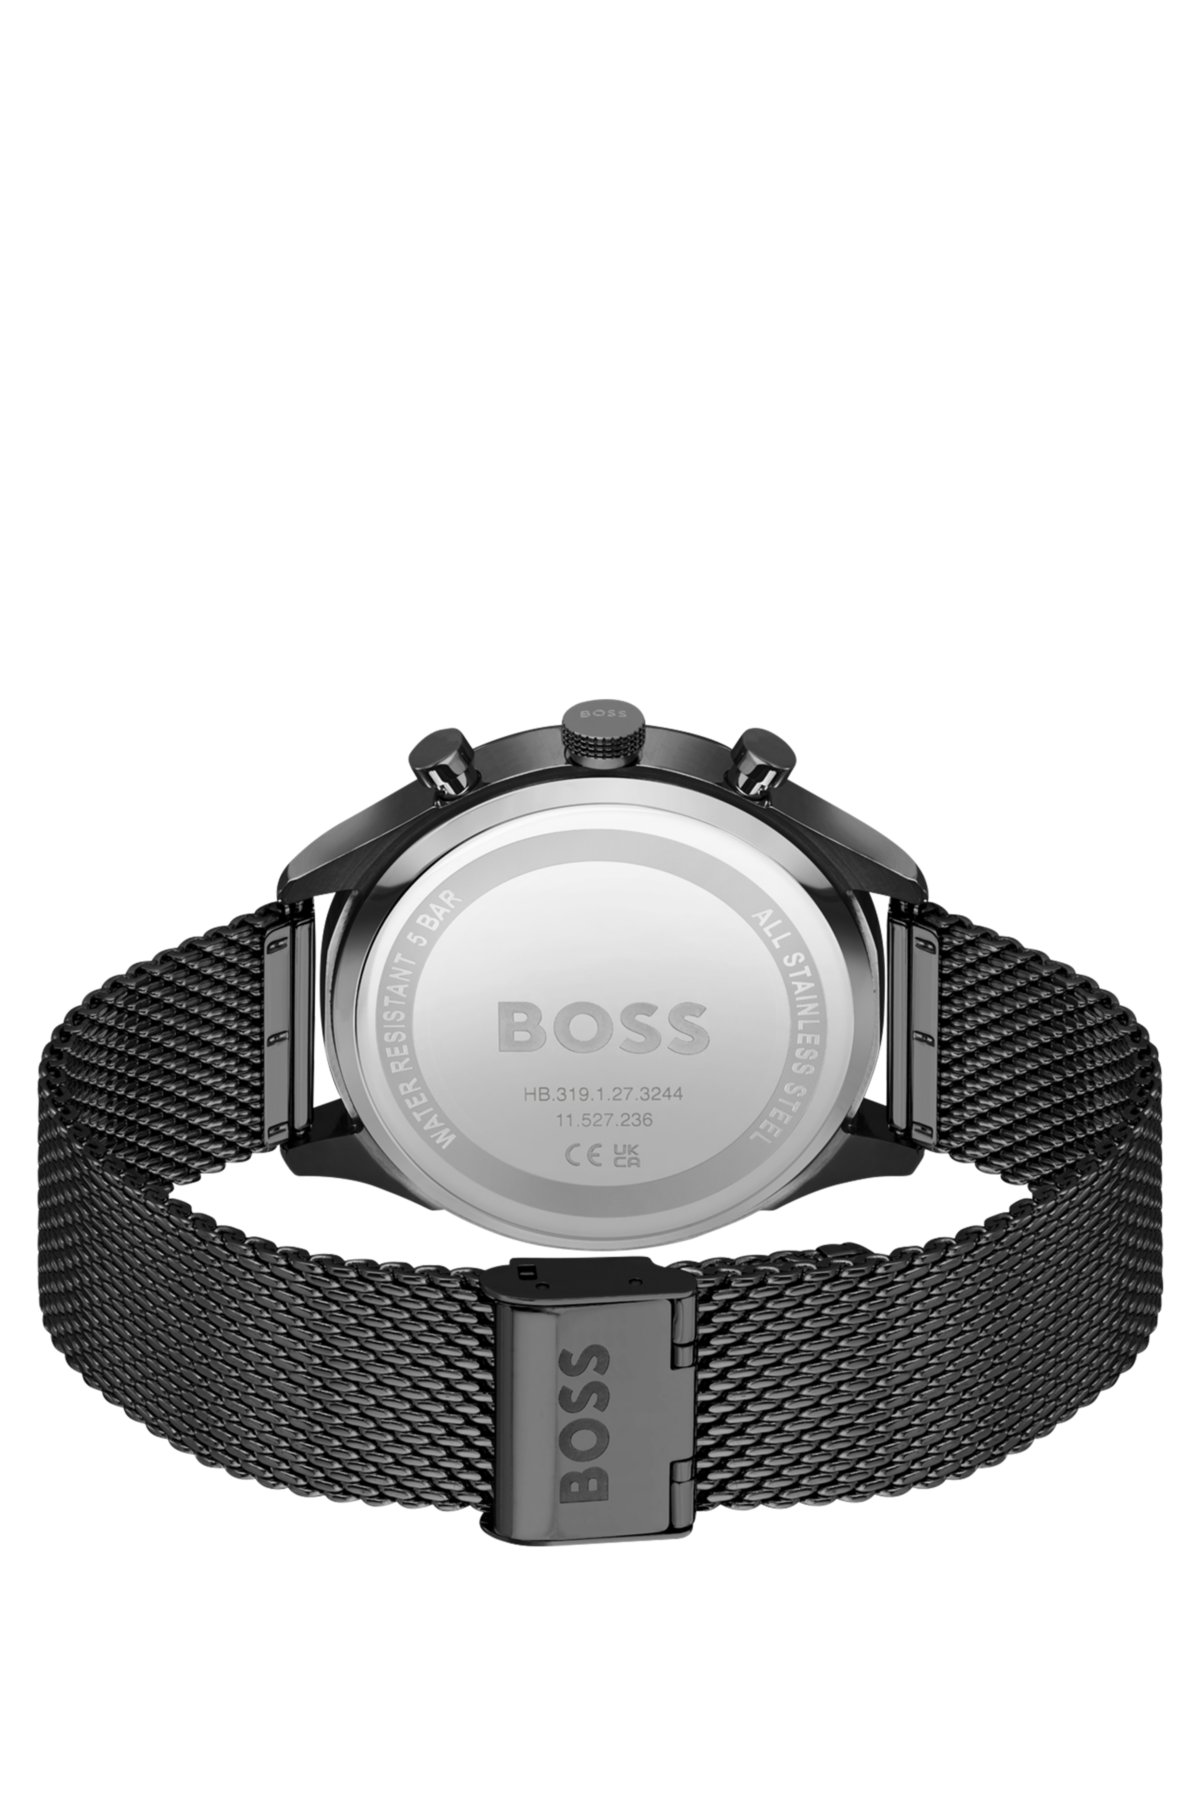 watch with BOSS chronograph Black-plated mesh bracelet -